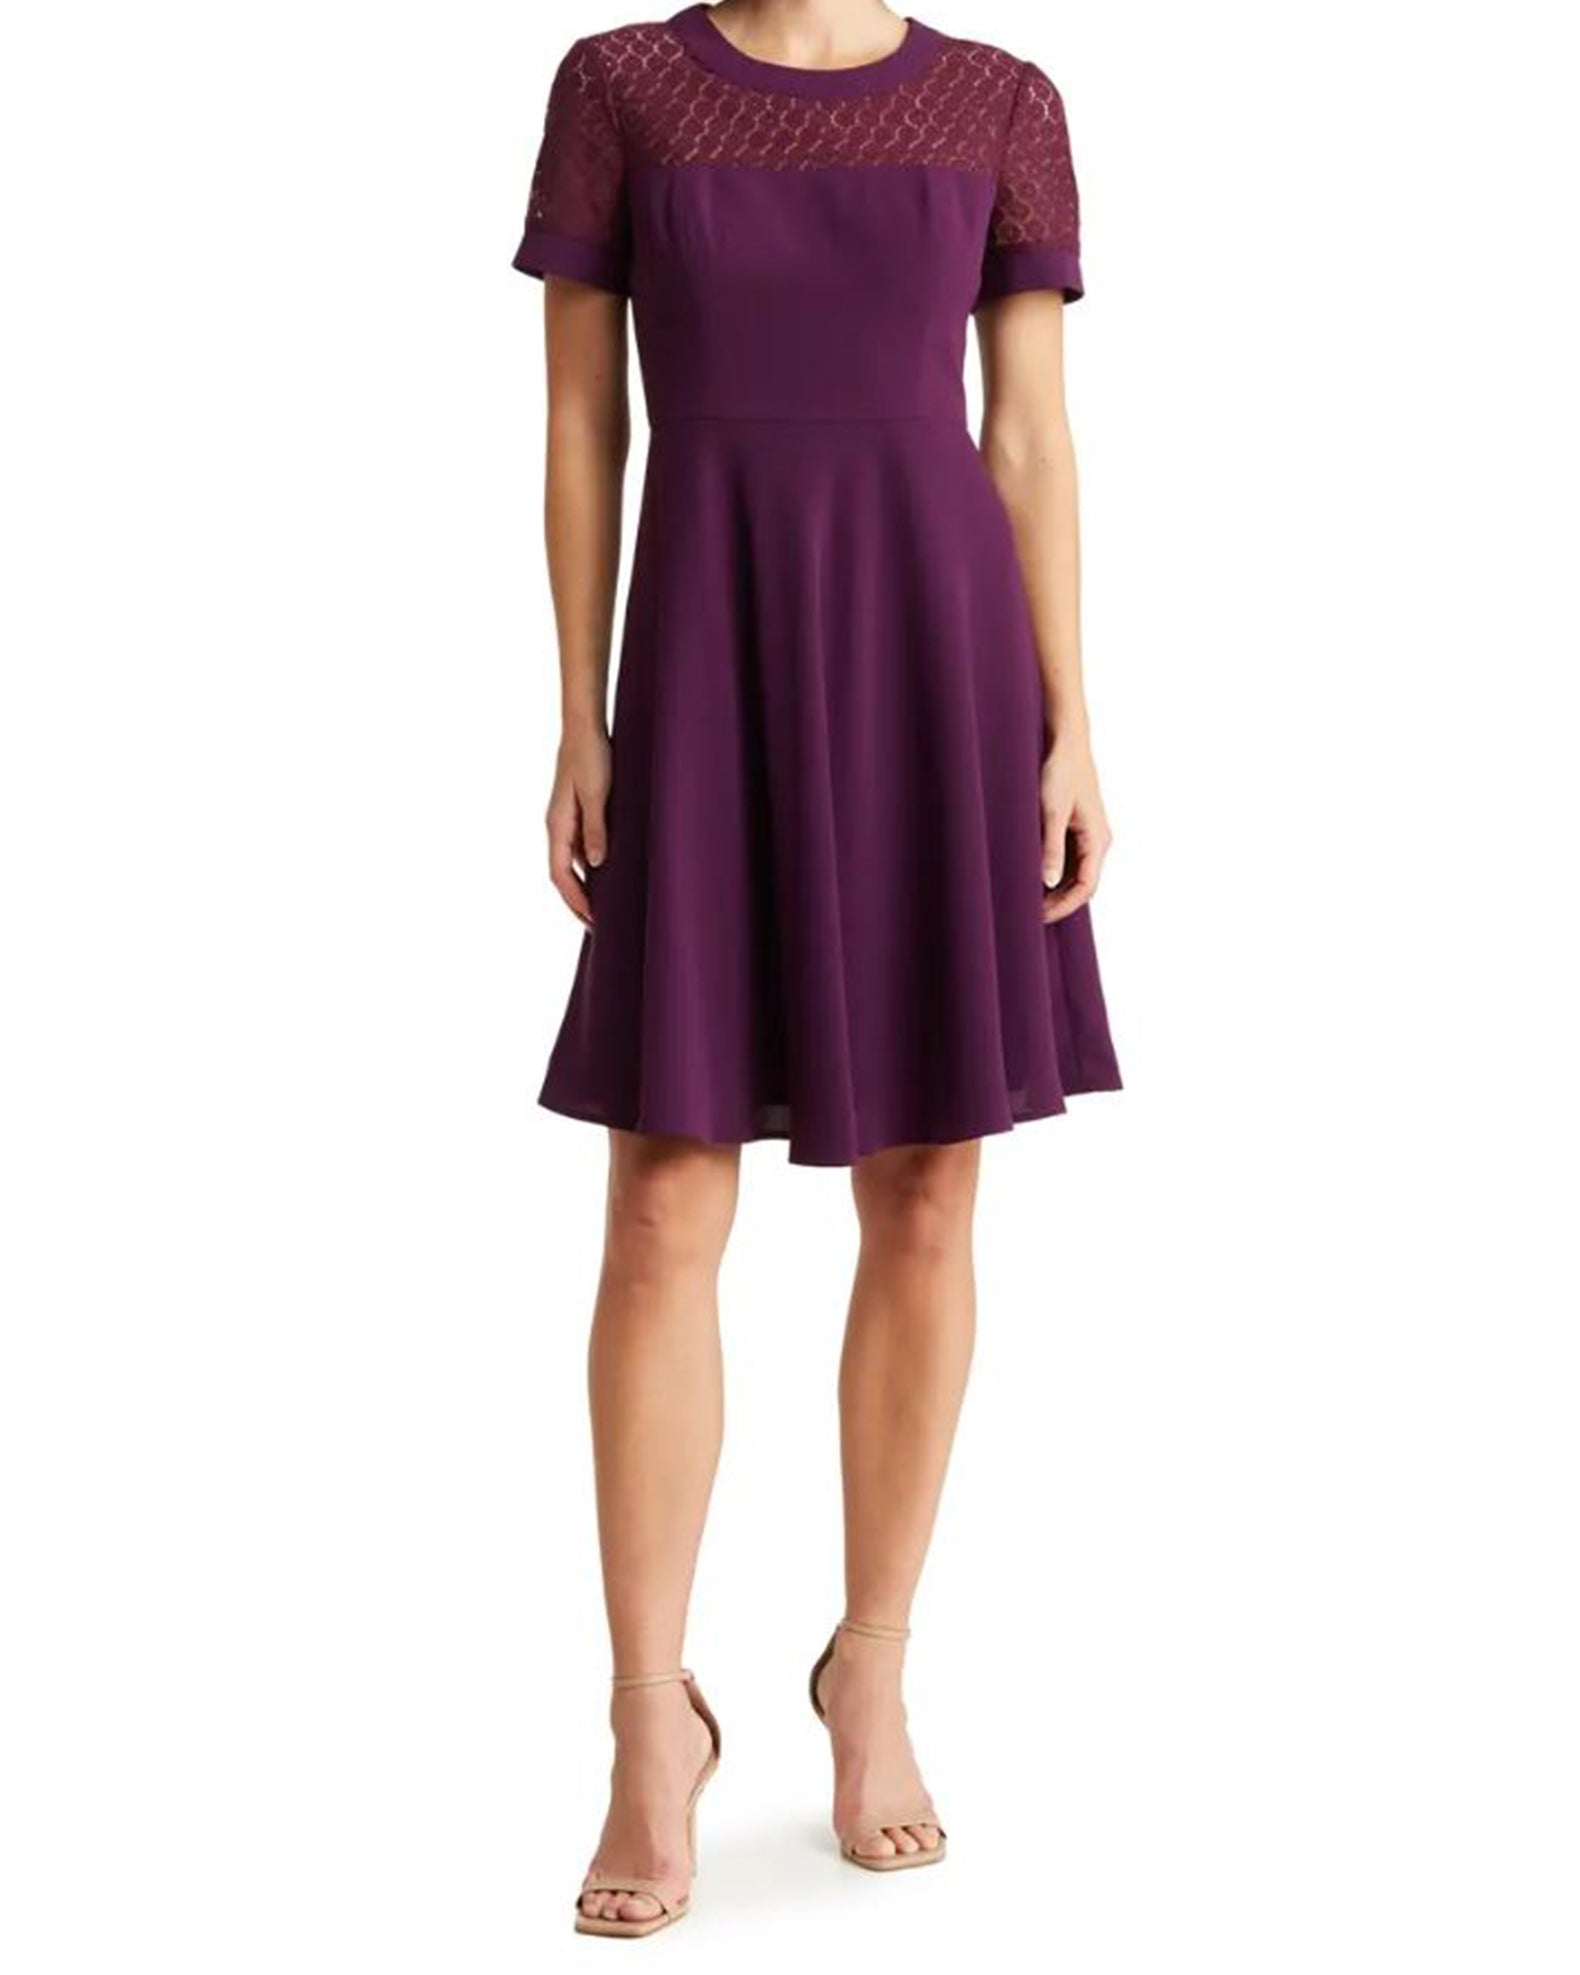 FOCUS by SHANI - Fit and Flare Crepe Dress in BERRY